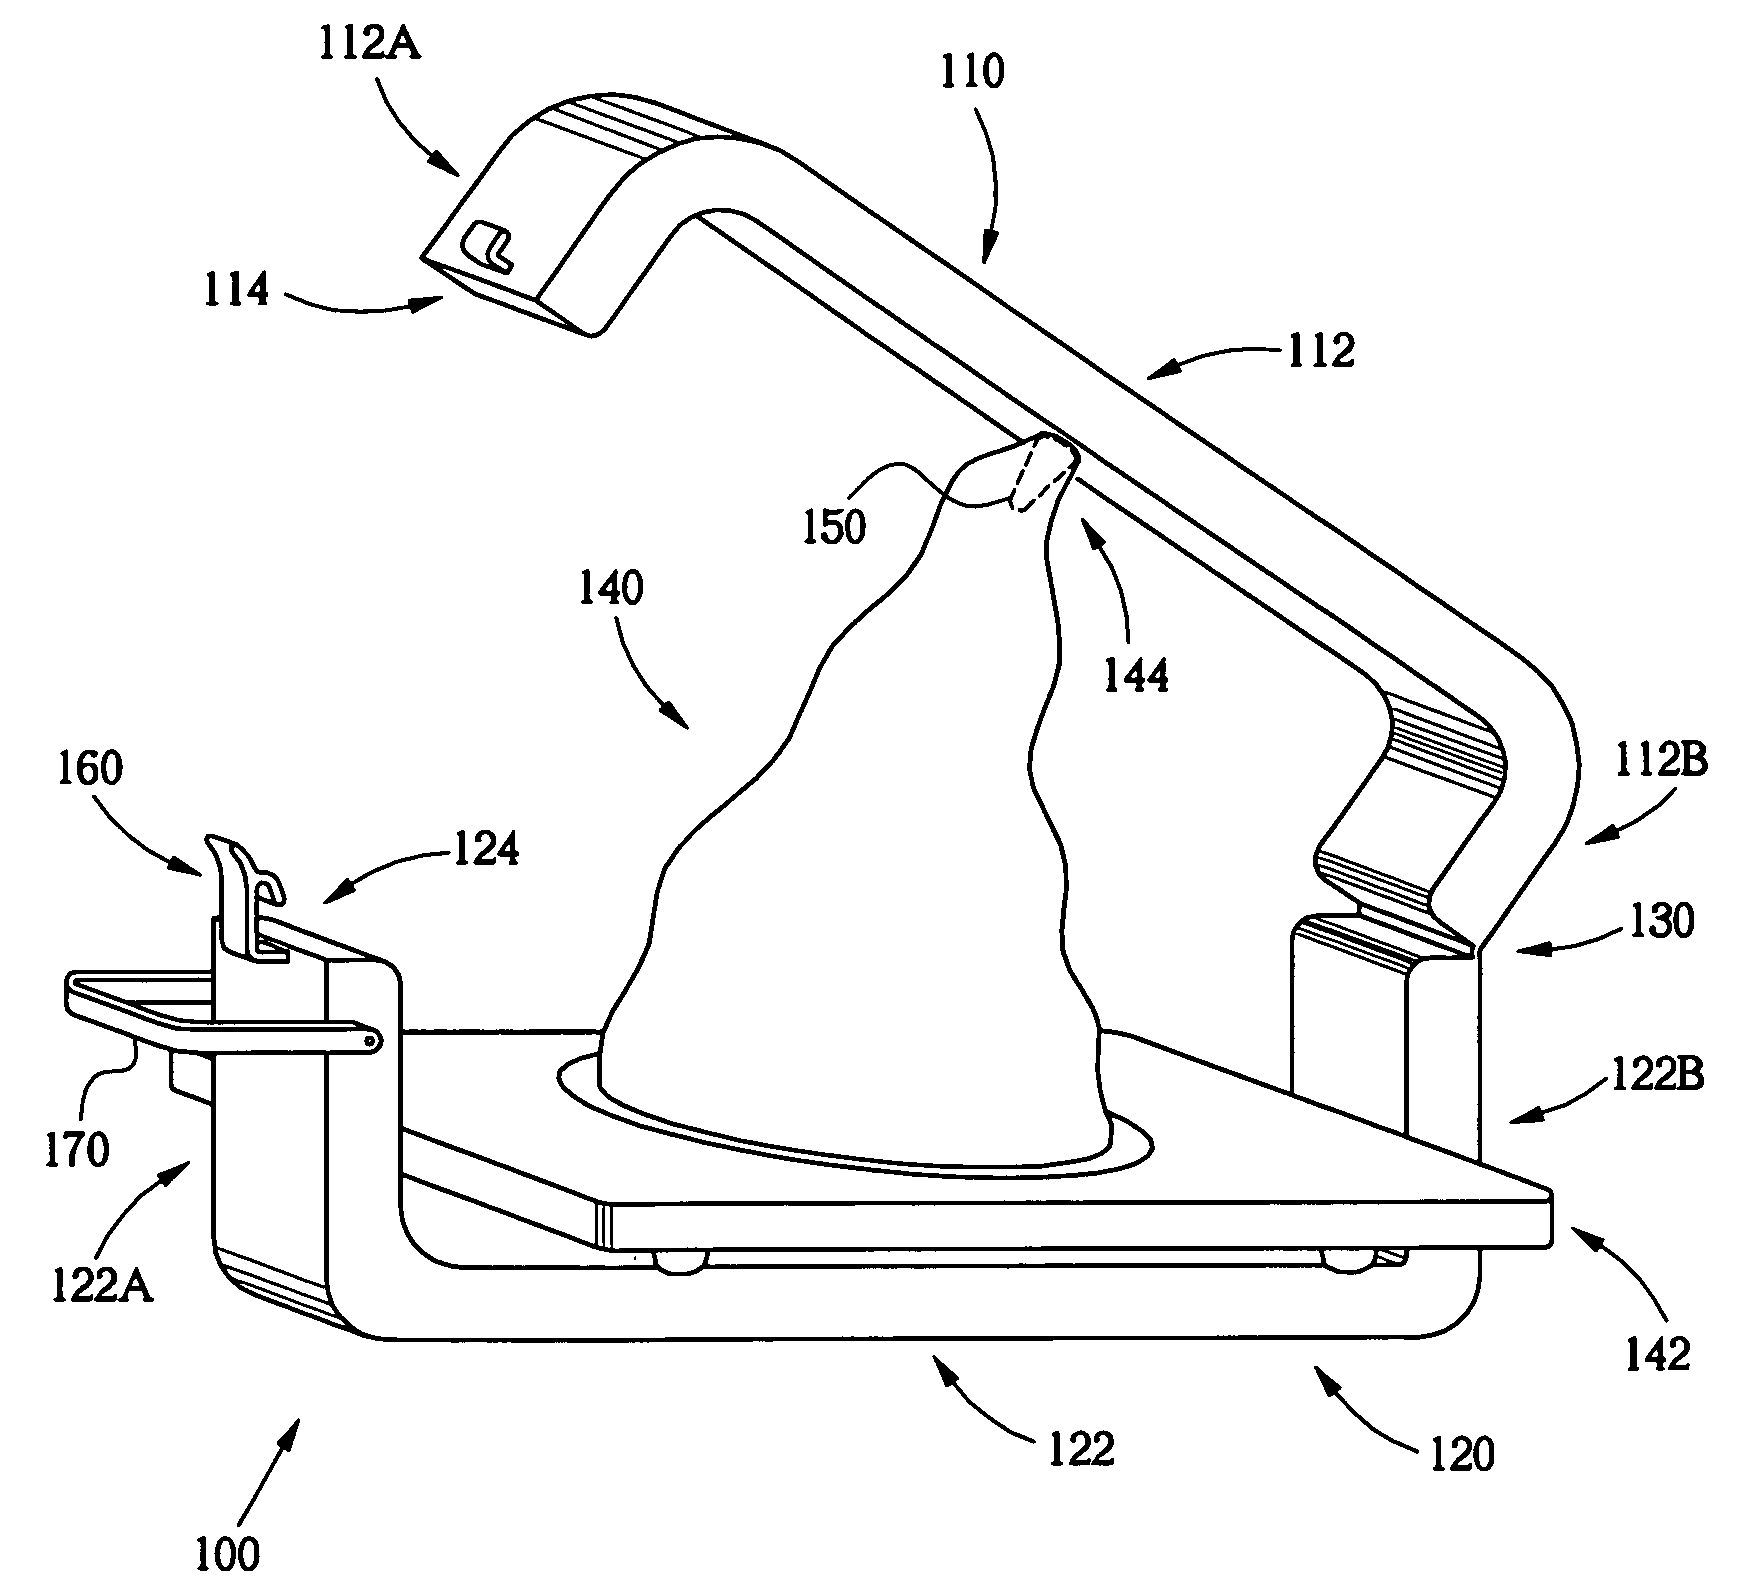 Safety cone holder device